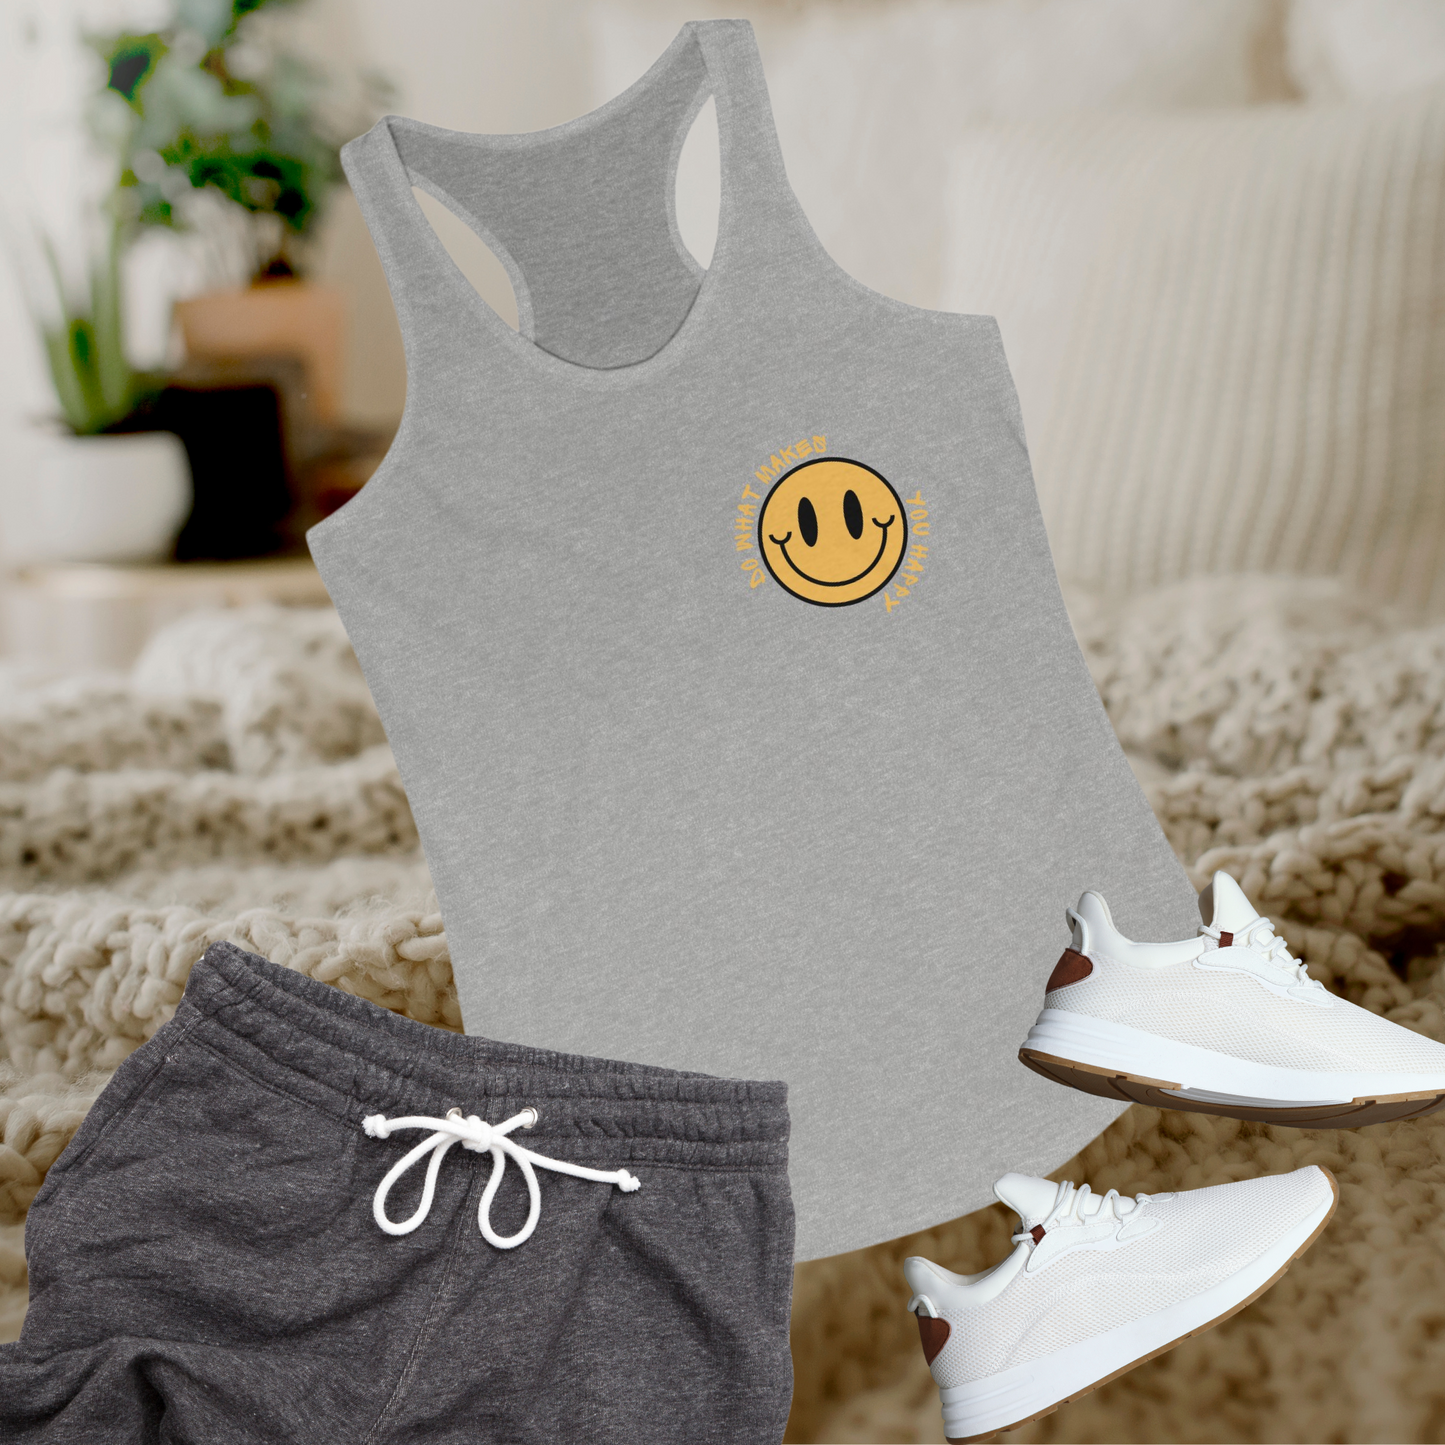 DO WHAT MAKES YOU HAPPY Women's Ideal Racerback Tank